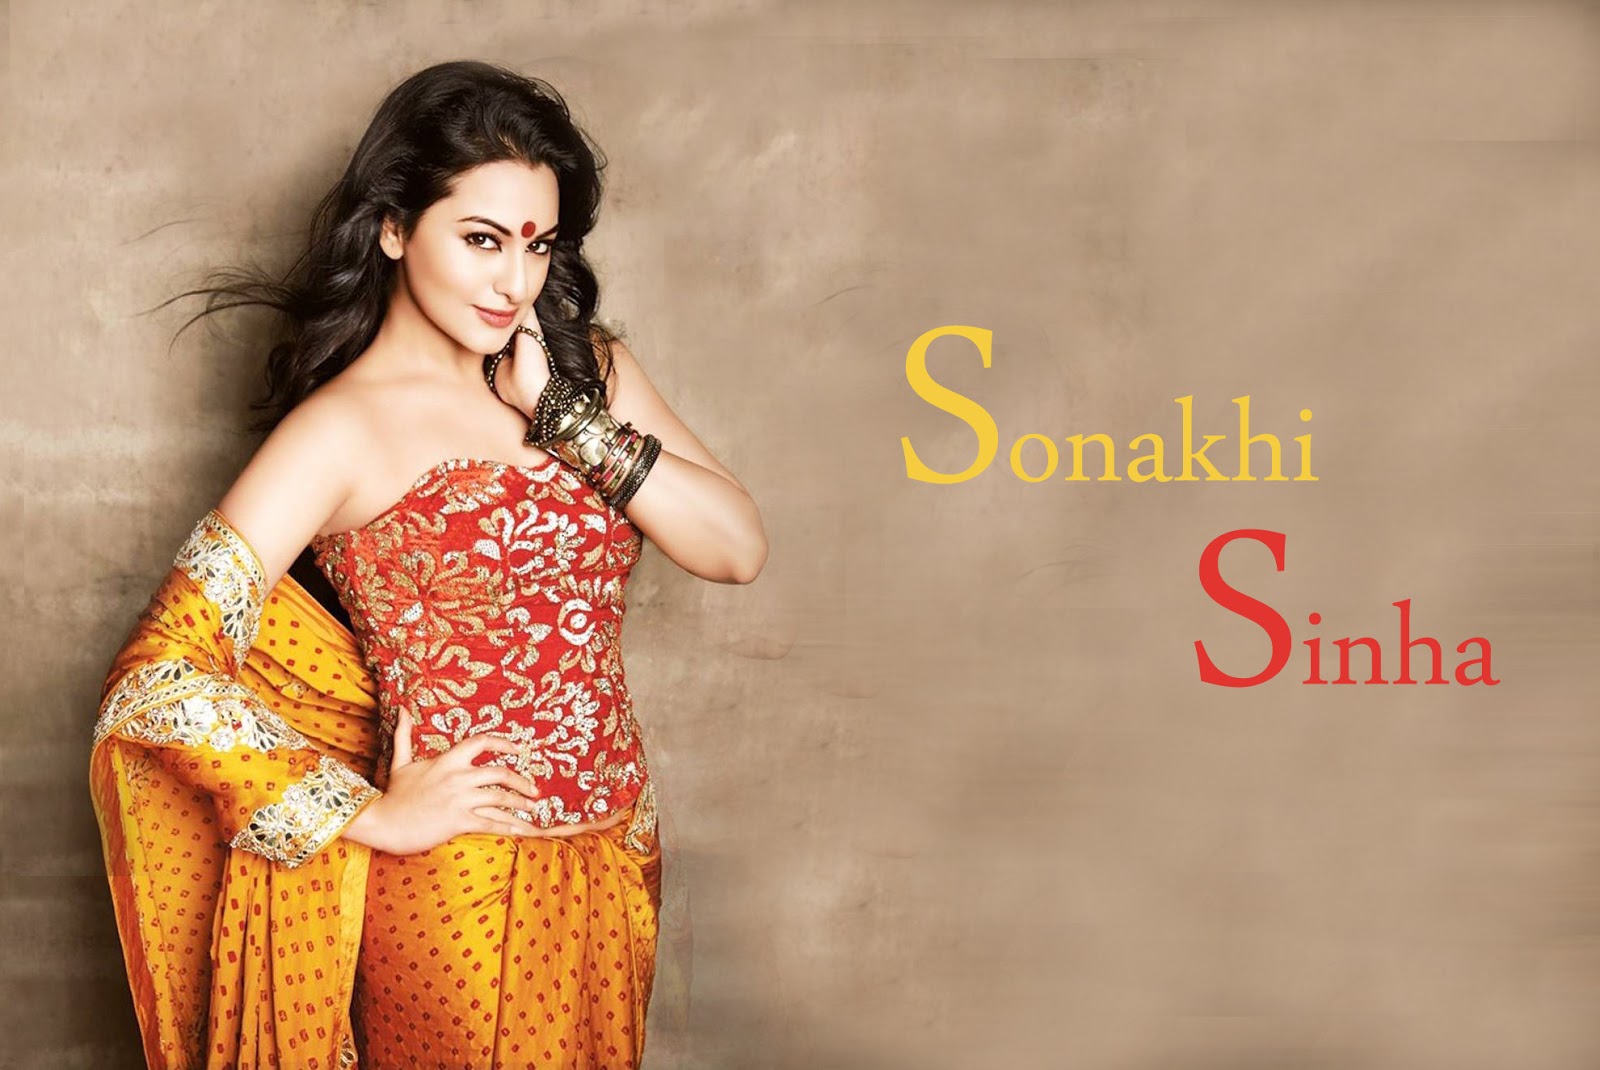 Sonakshi Sinha 30 Top Best Photos And Wallpapers - Cinejolly